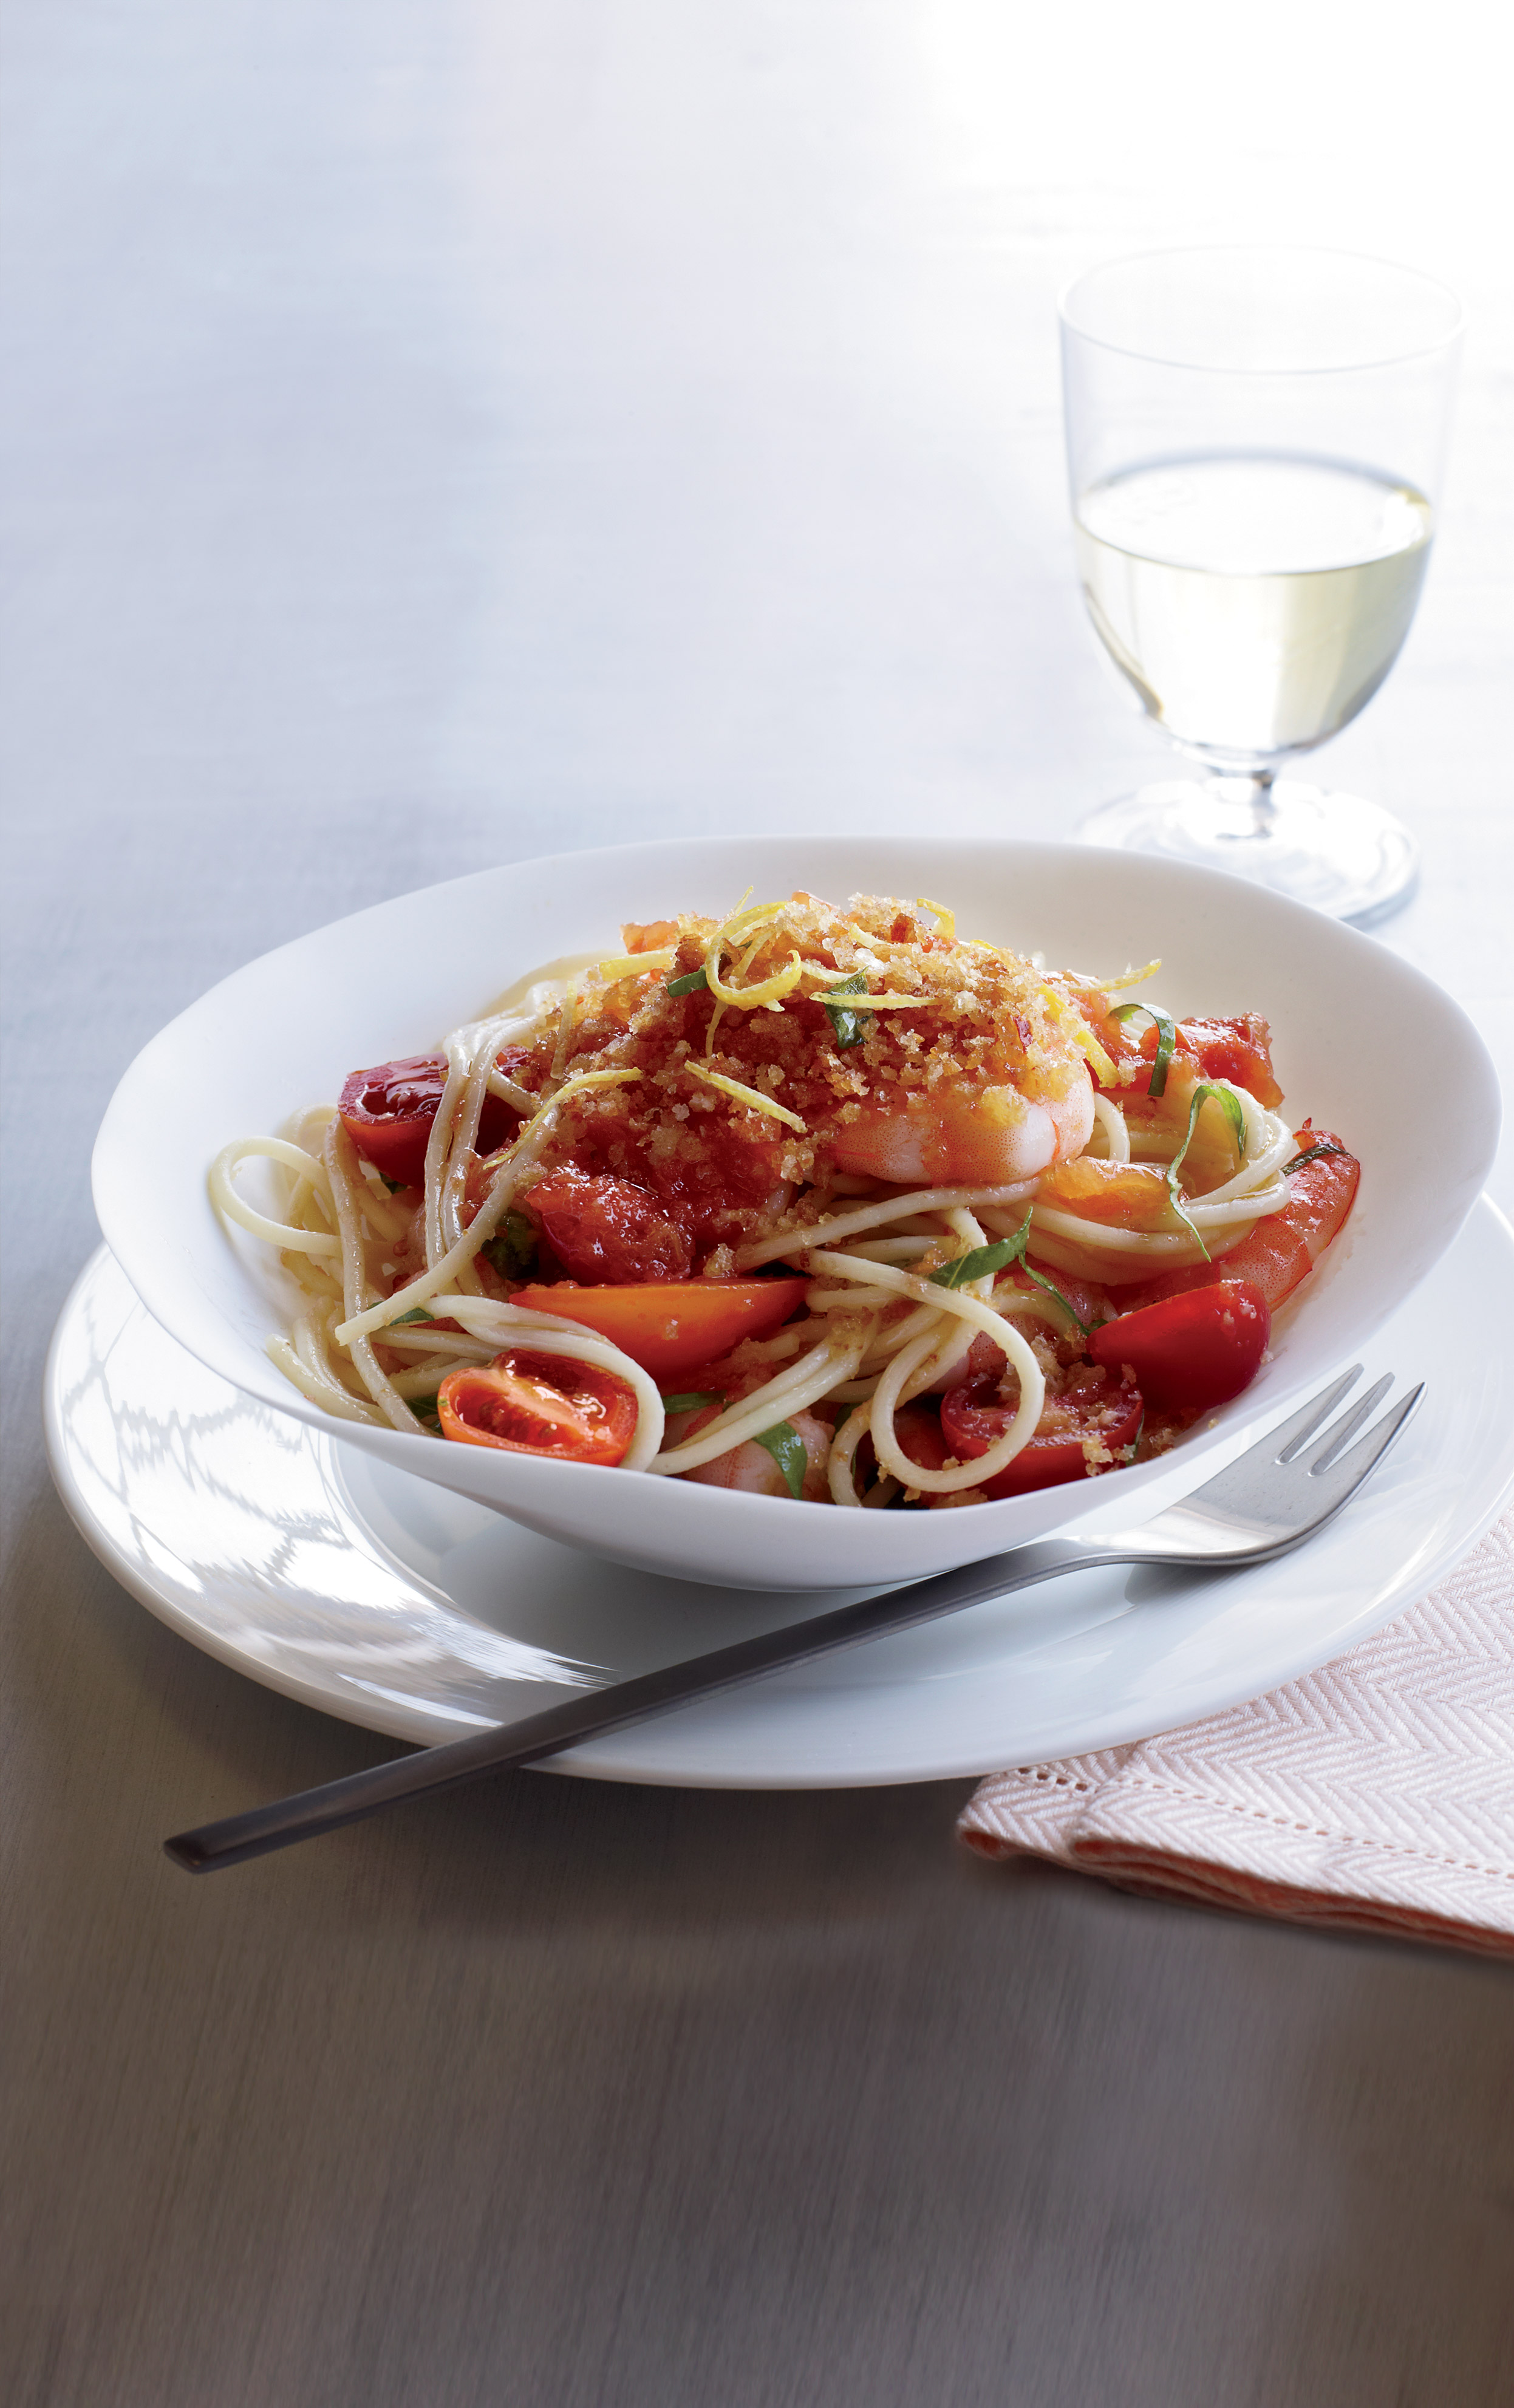 Spaghettini with Shrimp, Tomatoes and Chile Crumbs
                              Dan Kluger adds crunch to this delicious shrimp and summer tomato pasta with crisp lemon-chile crumbs.
                              Recipe